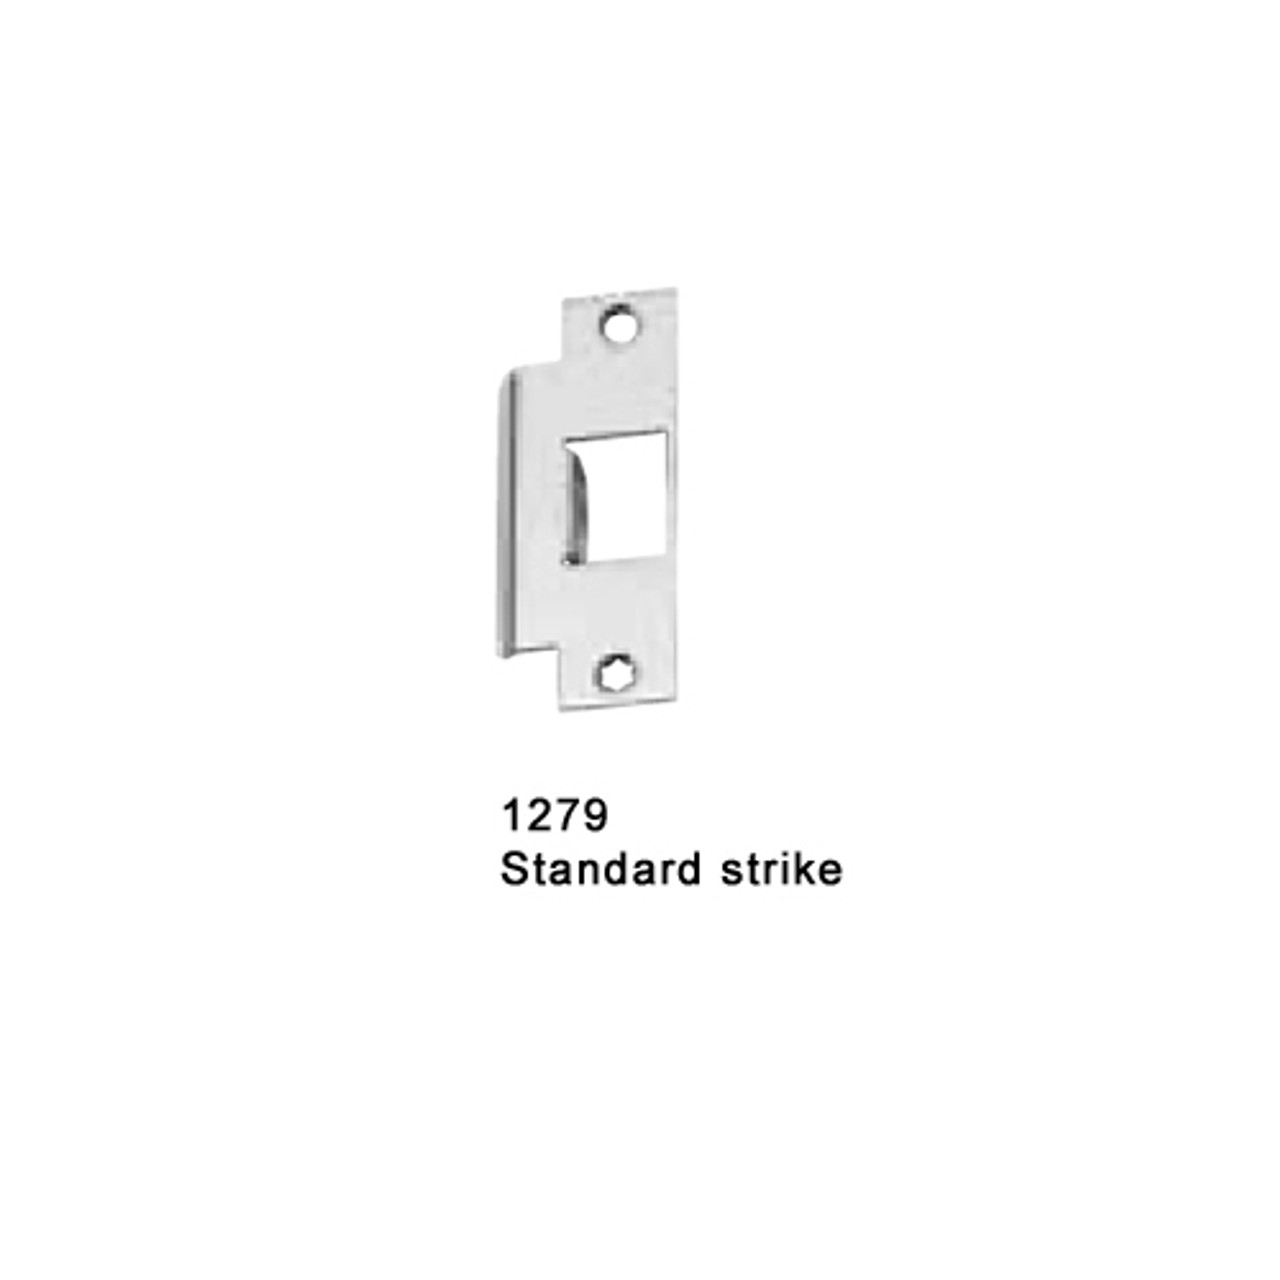 F-25-M-L-BE-Dane-US26D-3-LHR Falcon 25 Series Fire Rated Mortise Lock Devices 510L-BE Dane Lever Trim with Blank Escutcheon in Satin Chrome